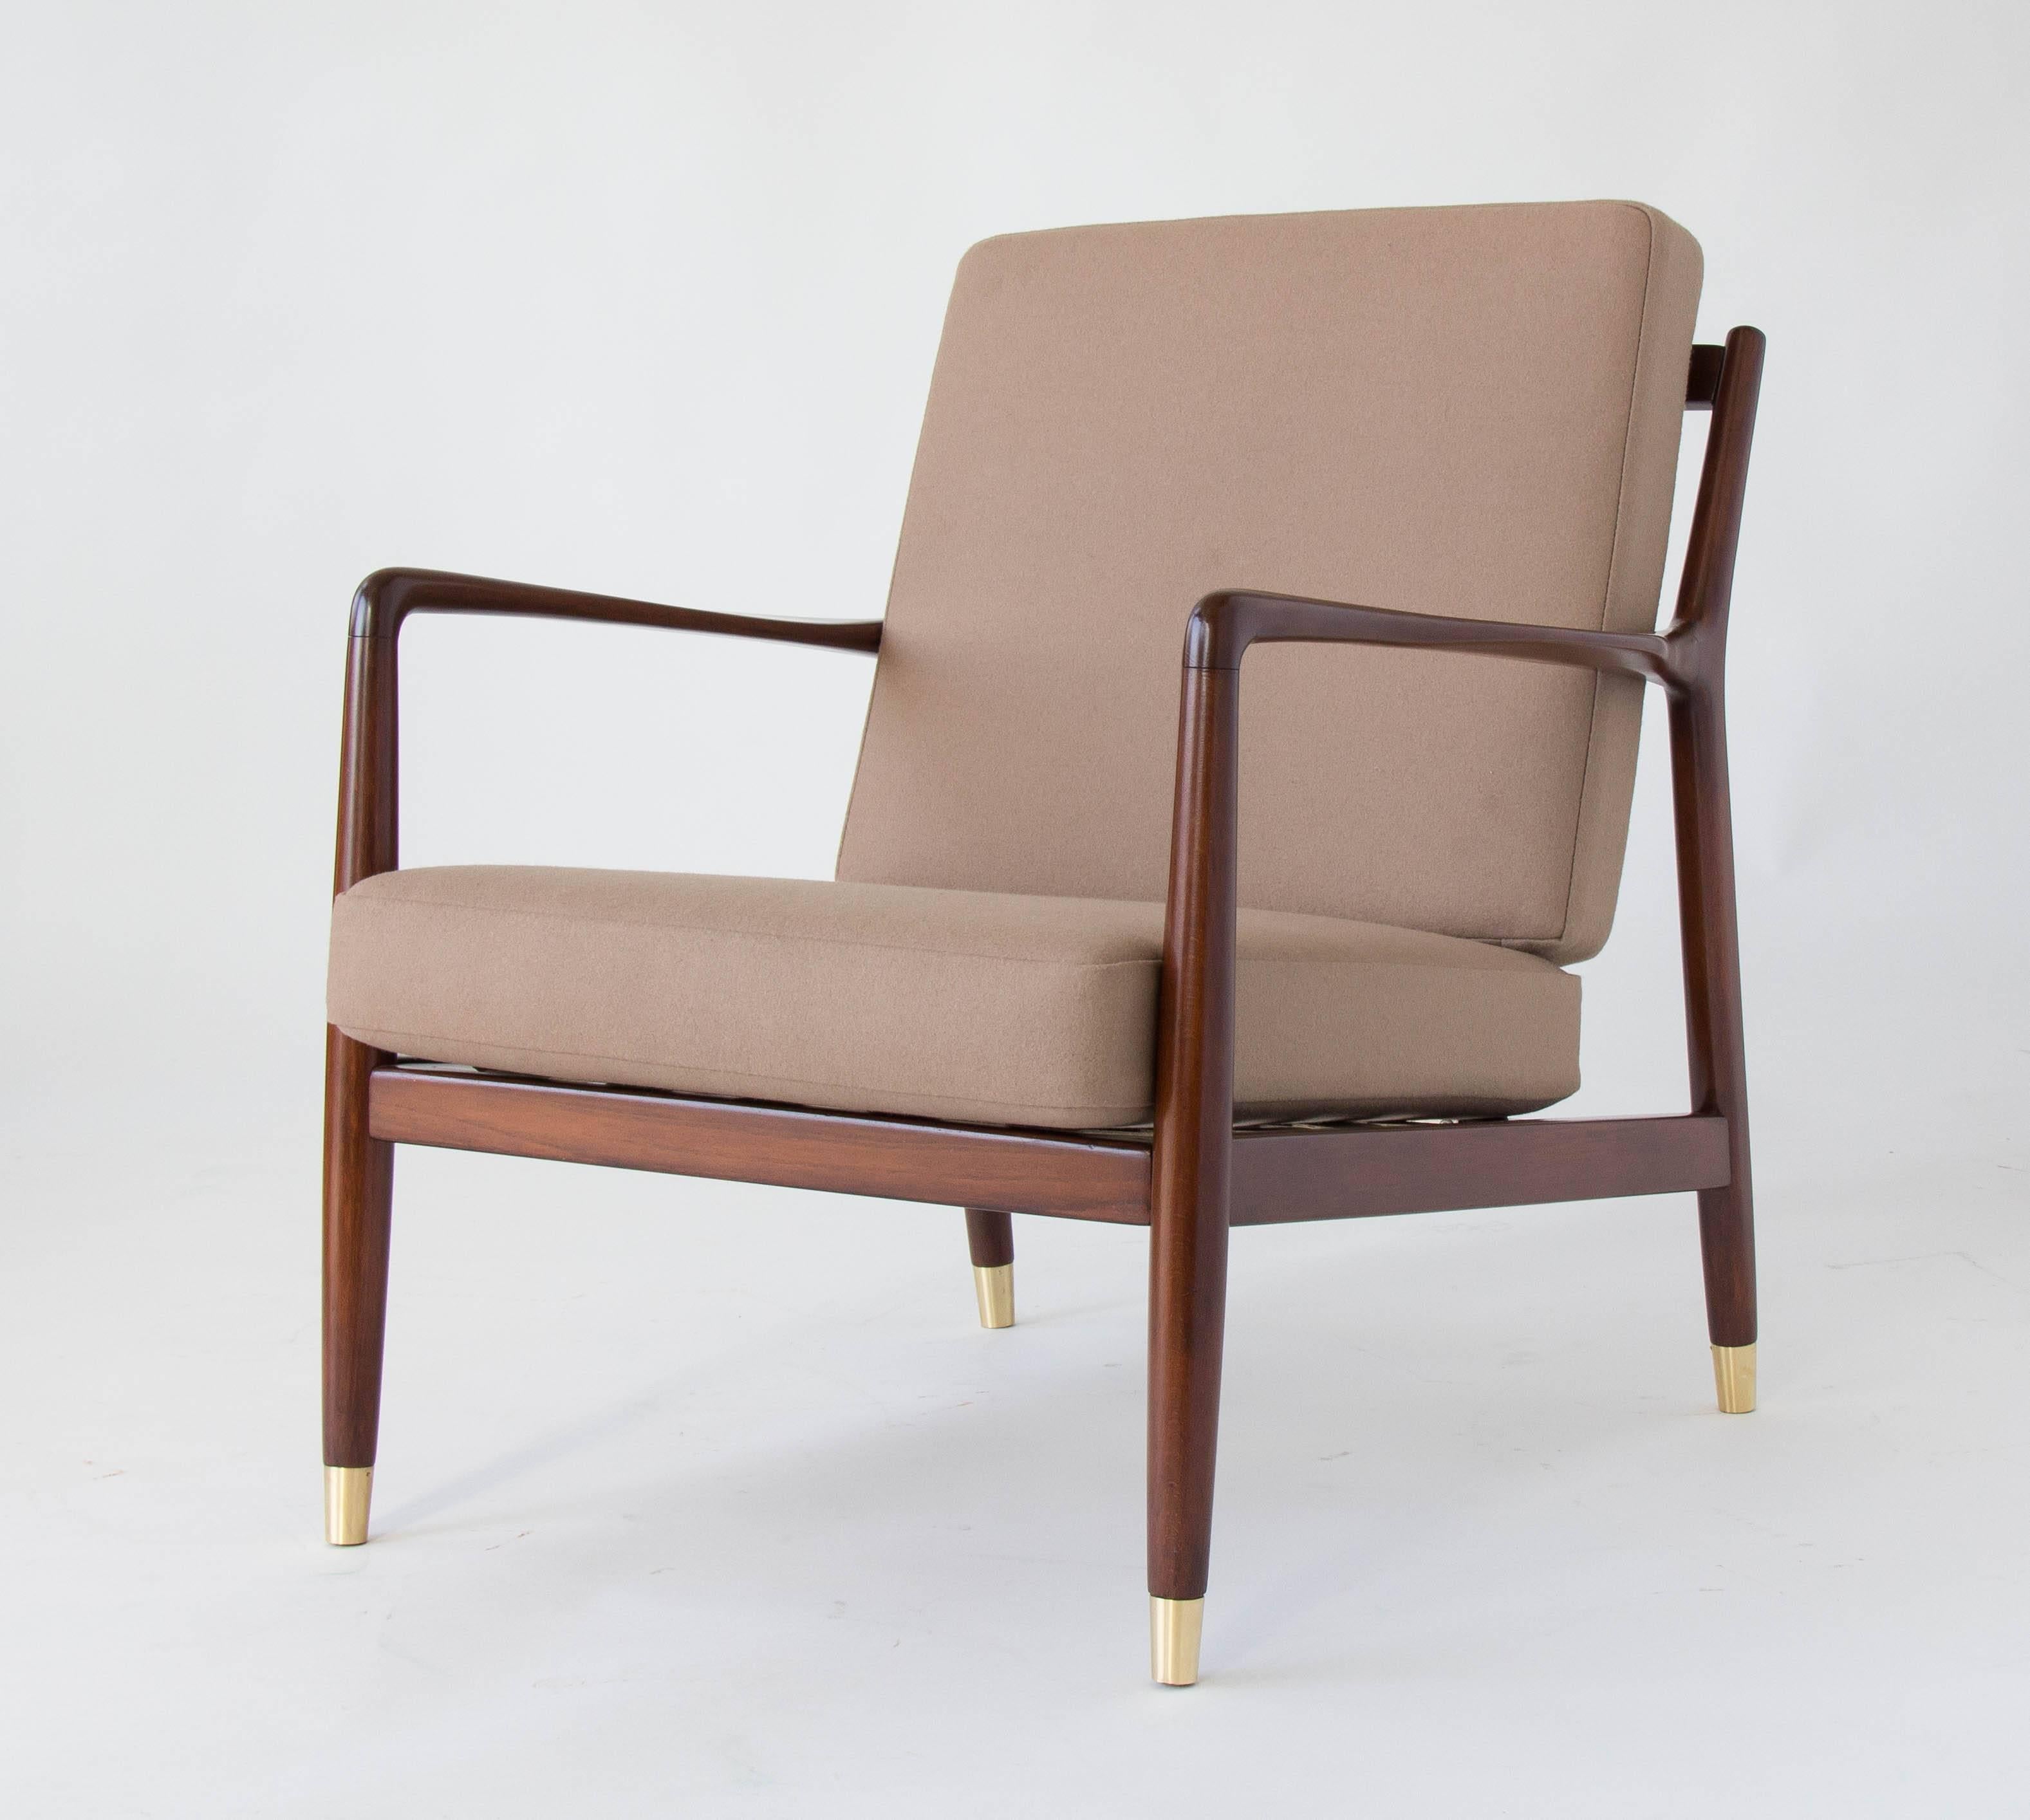 20th Century Pair of Lounge Chairs with Brass-Capped Legs by Folke Ohlsson for DUX